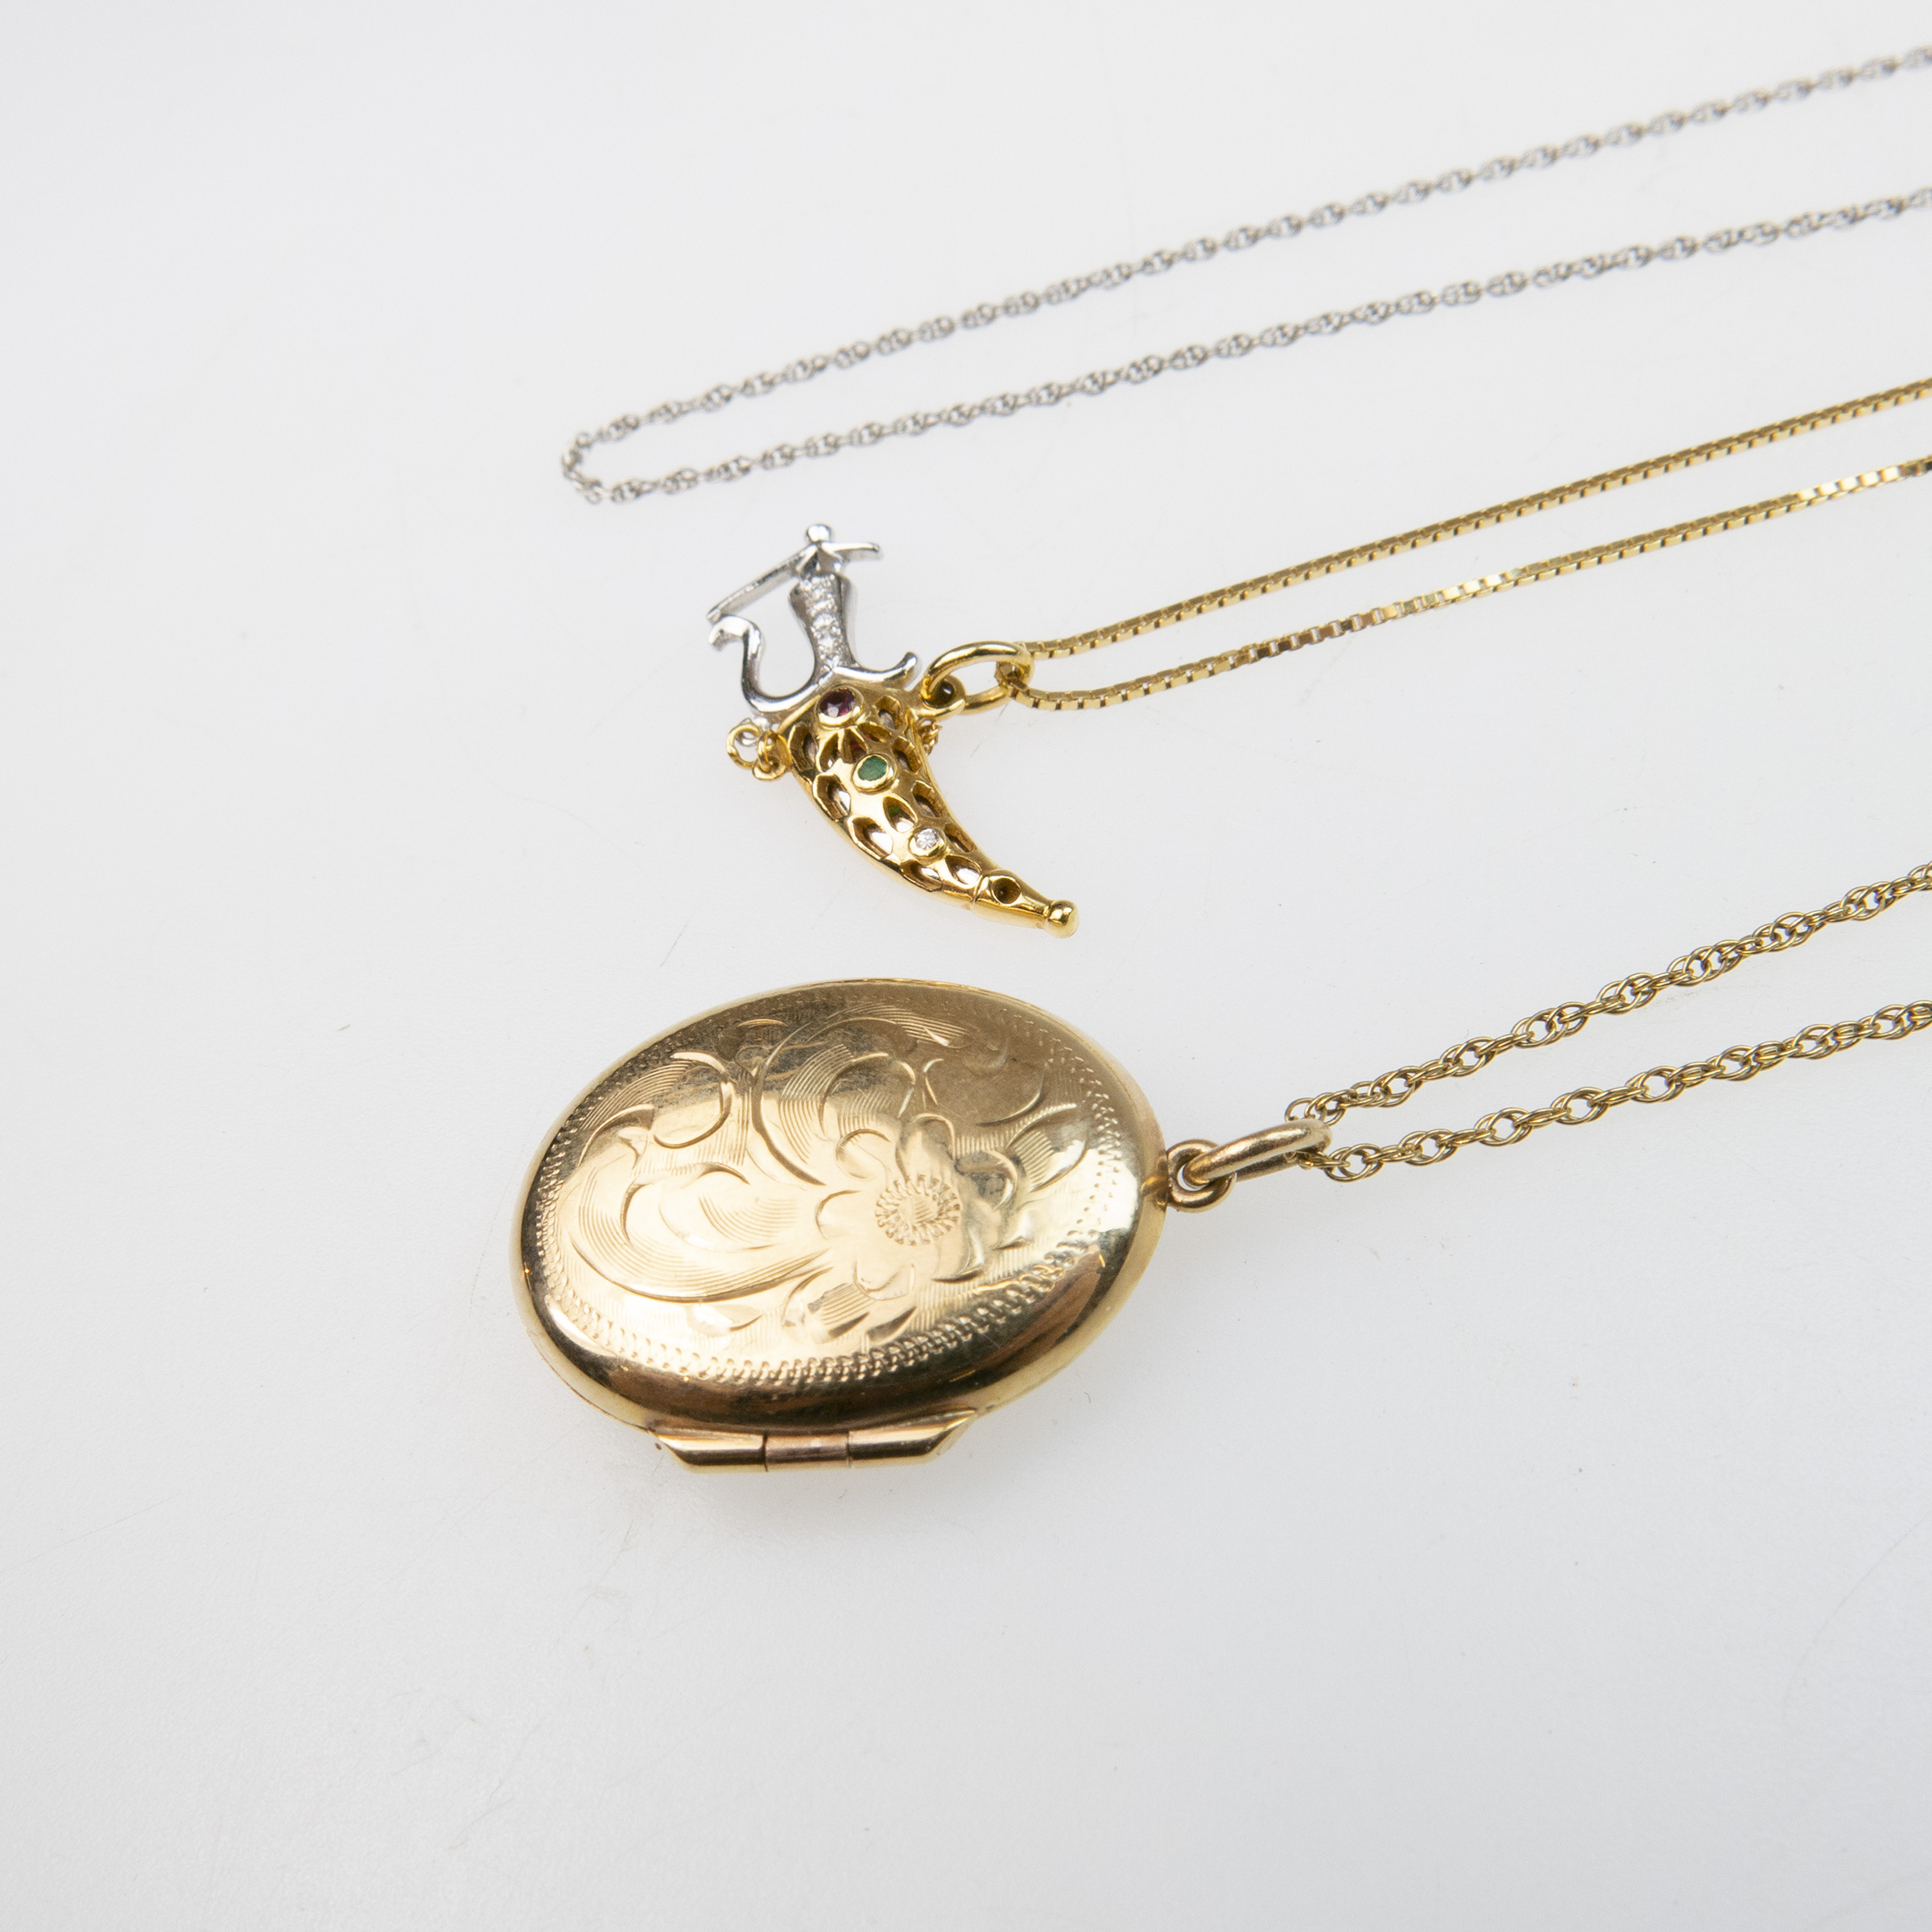 10k Yellow Gold Chain And Locket; a 14k white gold chain; and an 14k gold chain with 14k small gold dagger pendant